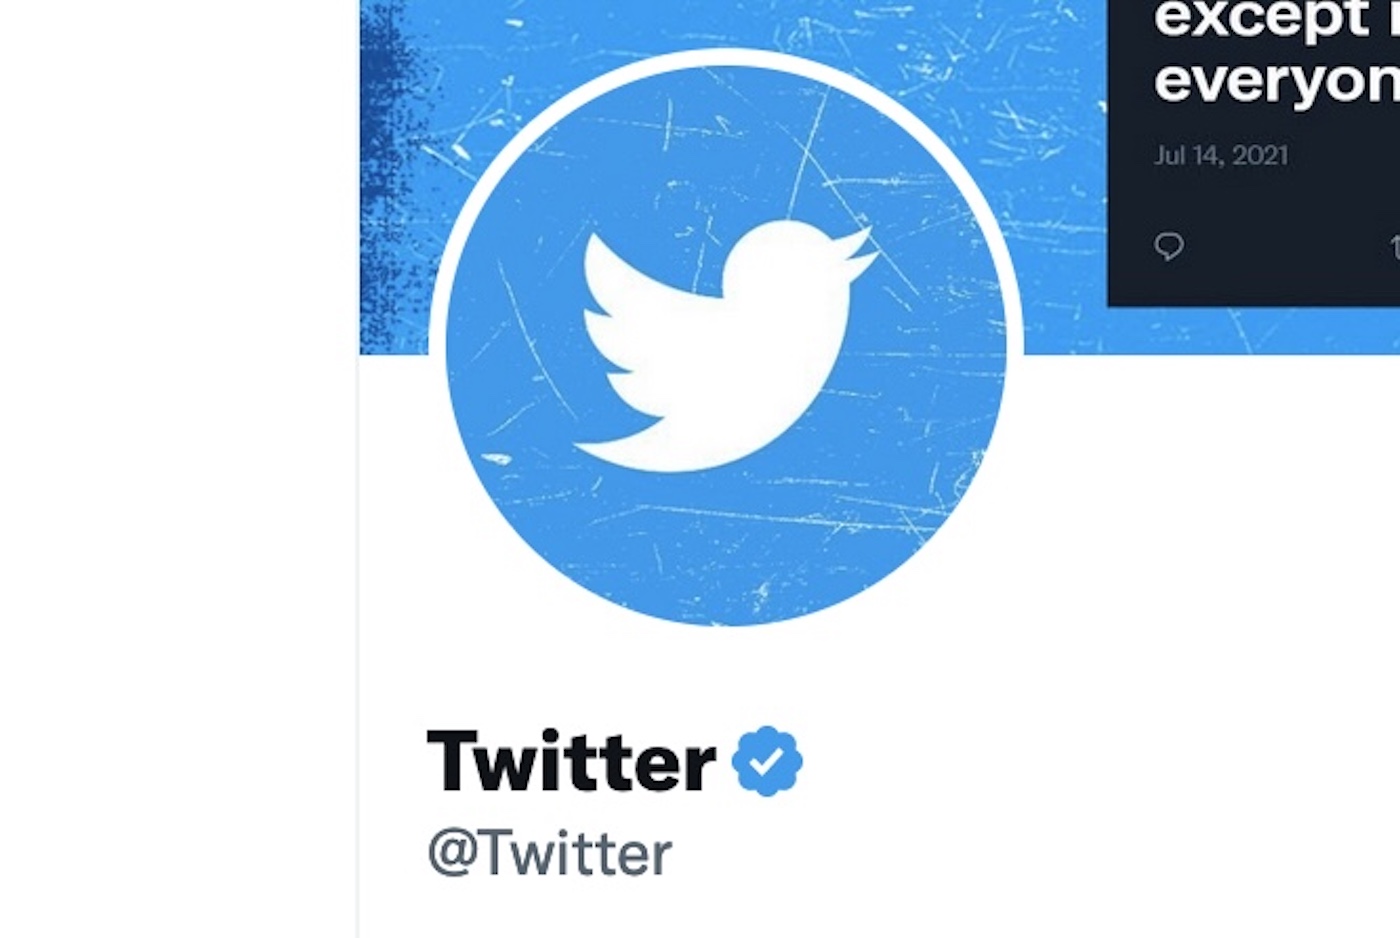 Twitter removes the blue badge from accounts certified with the old system